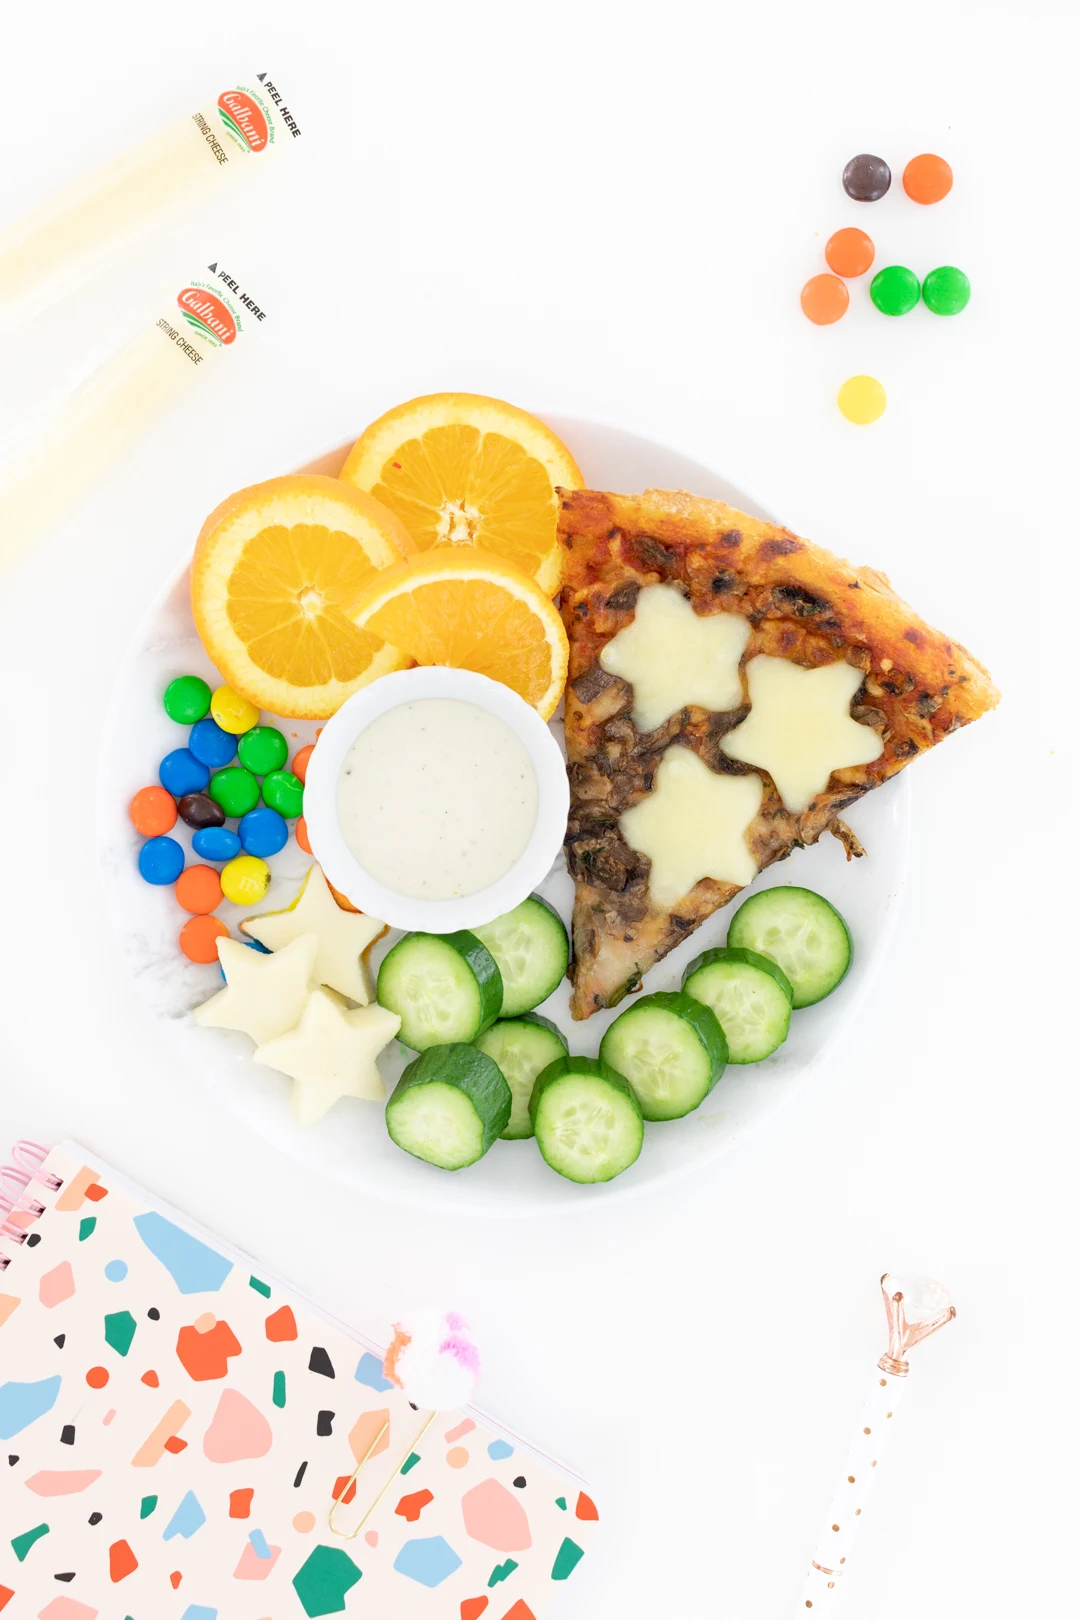 pizza snacks for kids with fruits and candies